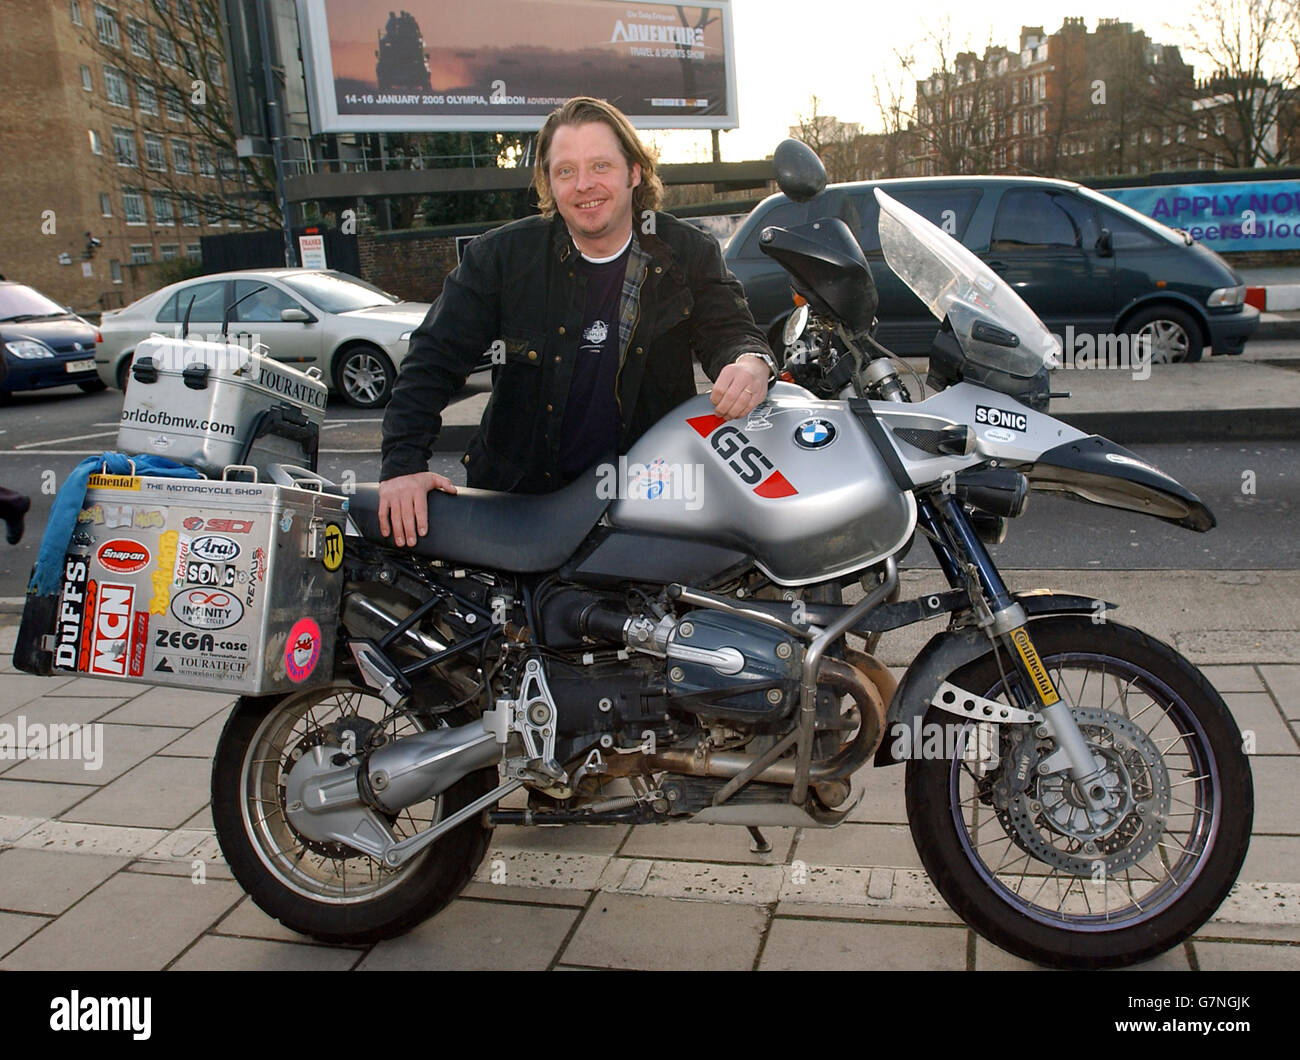 Round-the-World motorcyclist, Charley Boorman with one of the three BMW R1150GS  Adventure bikes contributed to Boorman and his riding partner Ewan  McGregor, by BMW, for their epic documentary trip "Long Way Round